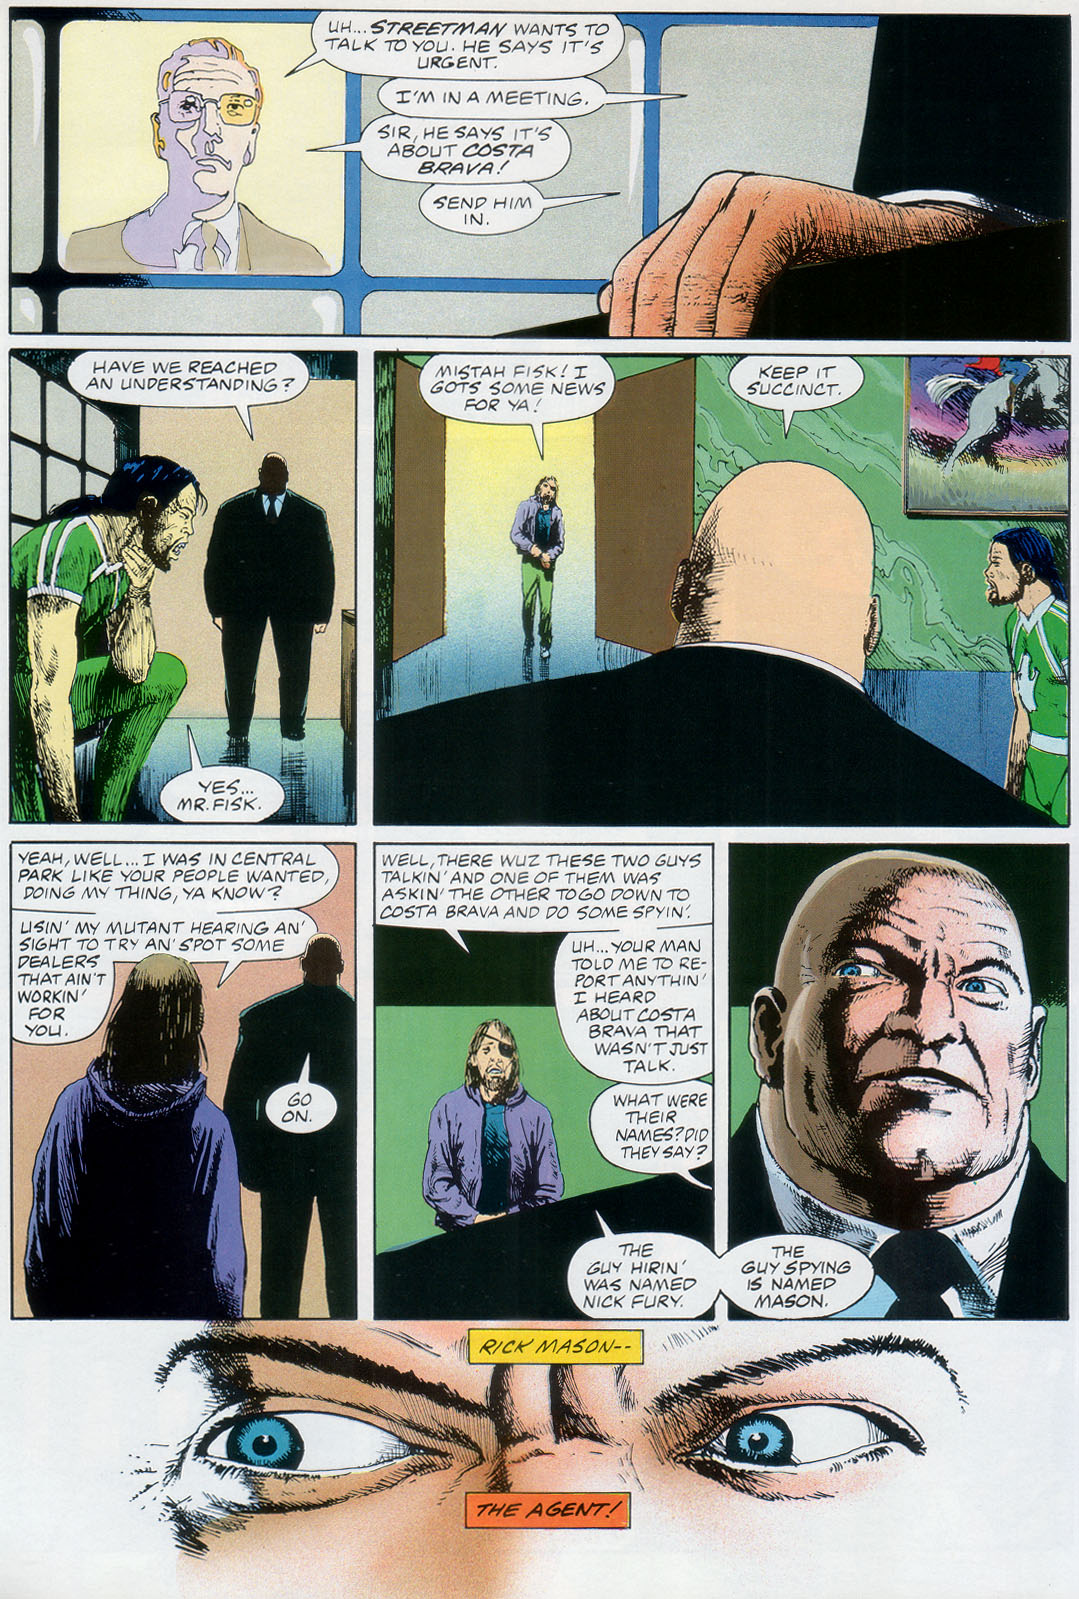 Marvel Graphic Novel issue 57 - Rick Mason - The Agent - Page 30